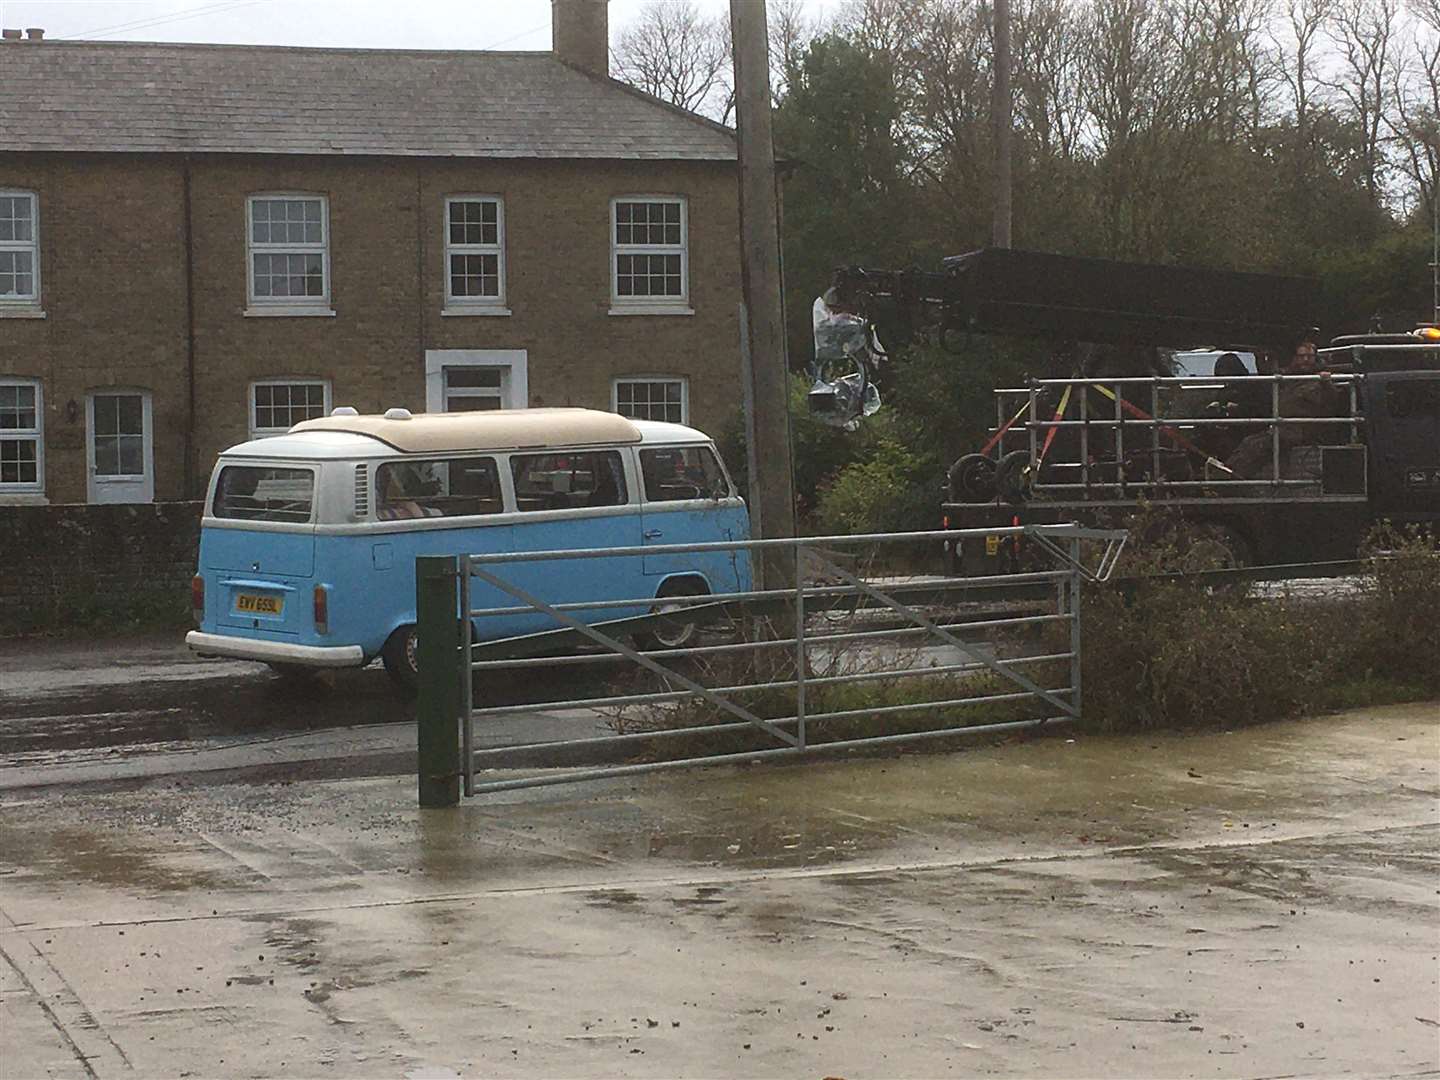 Film crews were spotted with the Friends' star in Mongeham in Deal on Wednesday Picture: Ian Lawrence